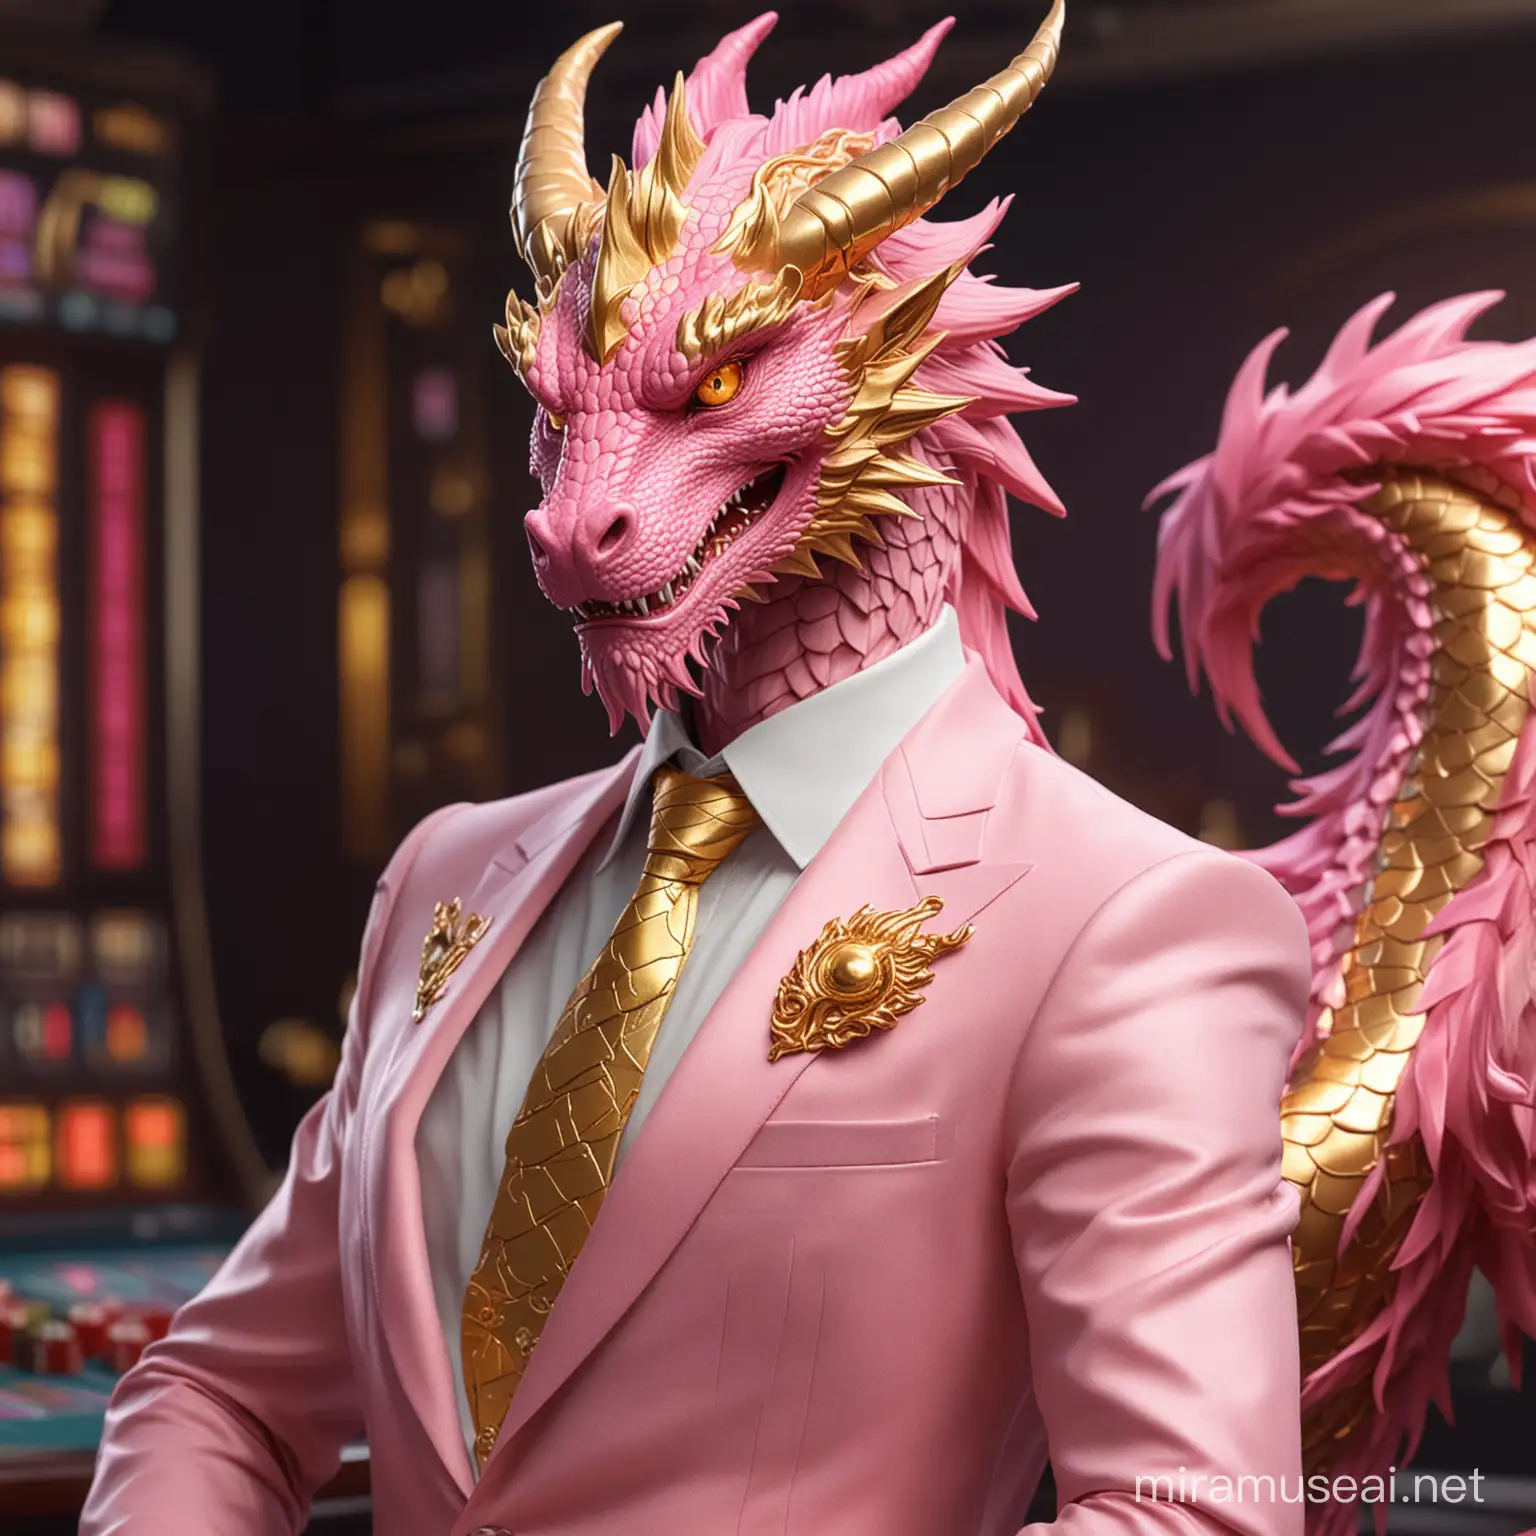 Pink Golden Dragon Developer in Formal Suit PC Programmer Support for Online Casino Gambling in Cosmo Style